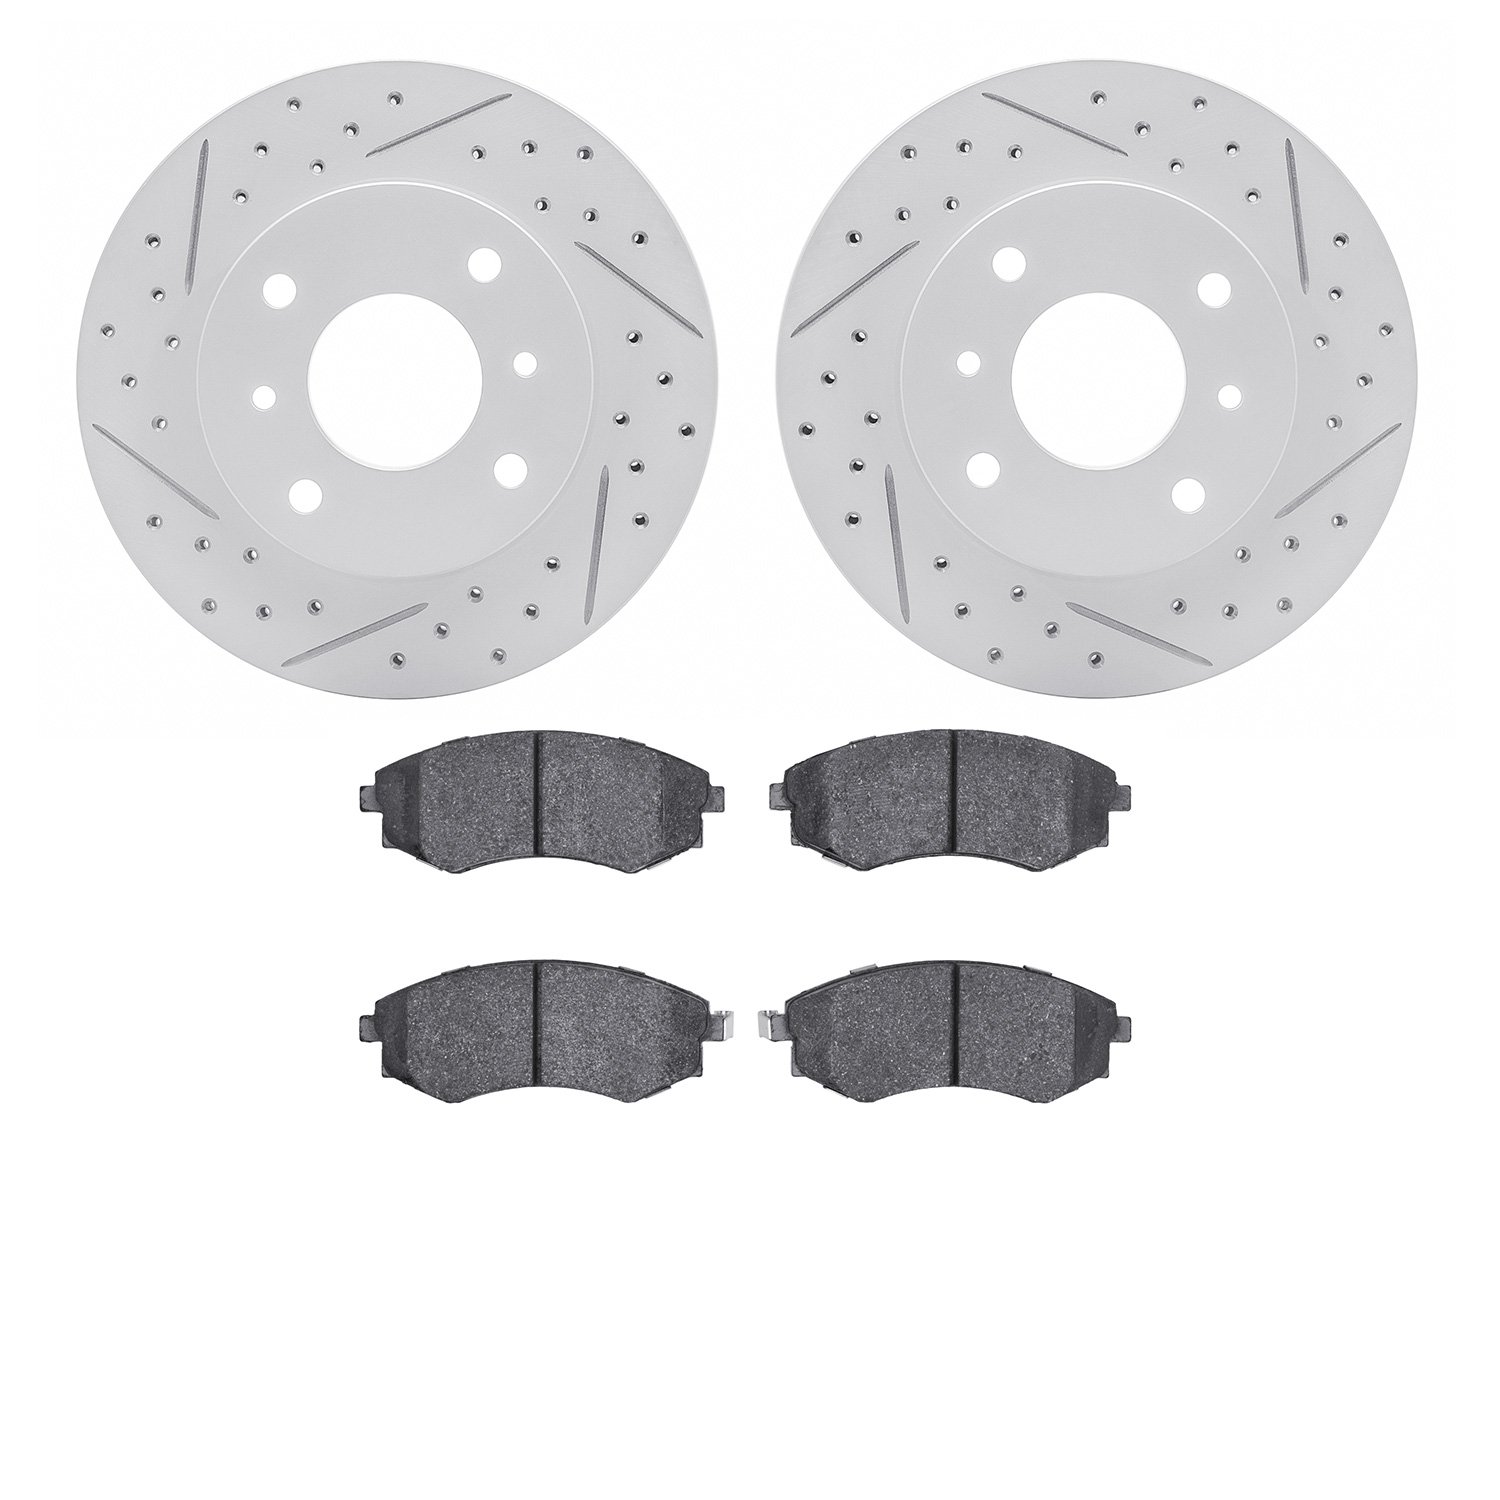 2502-67001 Geoperformance Drilled/Slotted Rotors w/5000 Advanced Brake Pads Kit, 1997-2006 Infiniti/Nissan, Position: Front